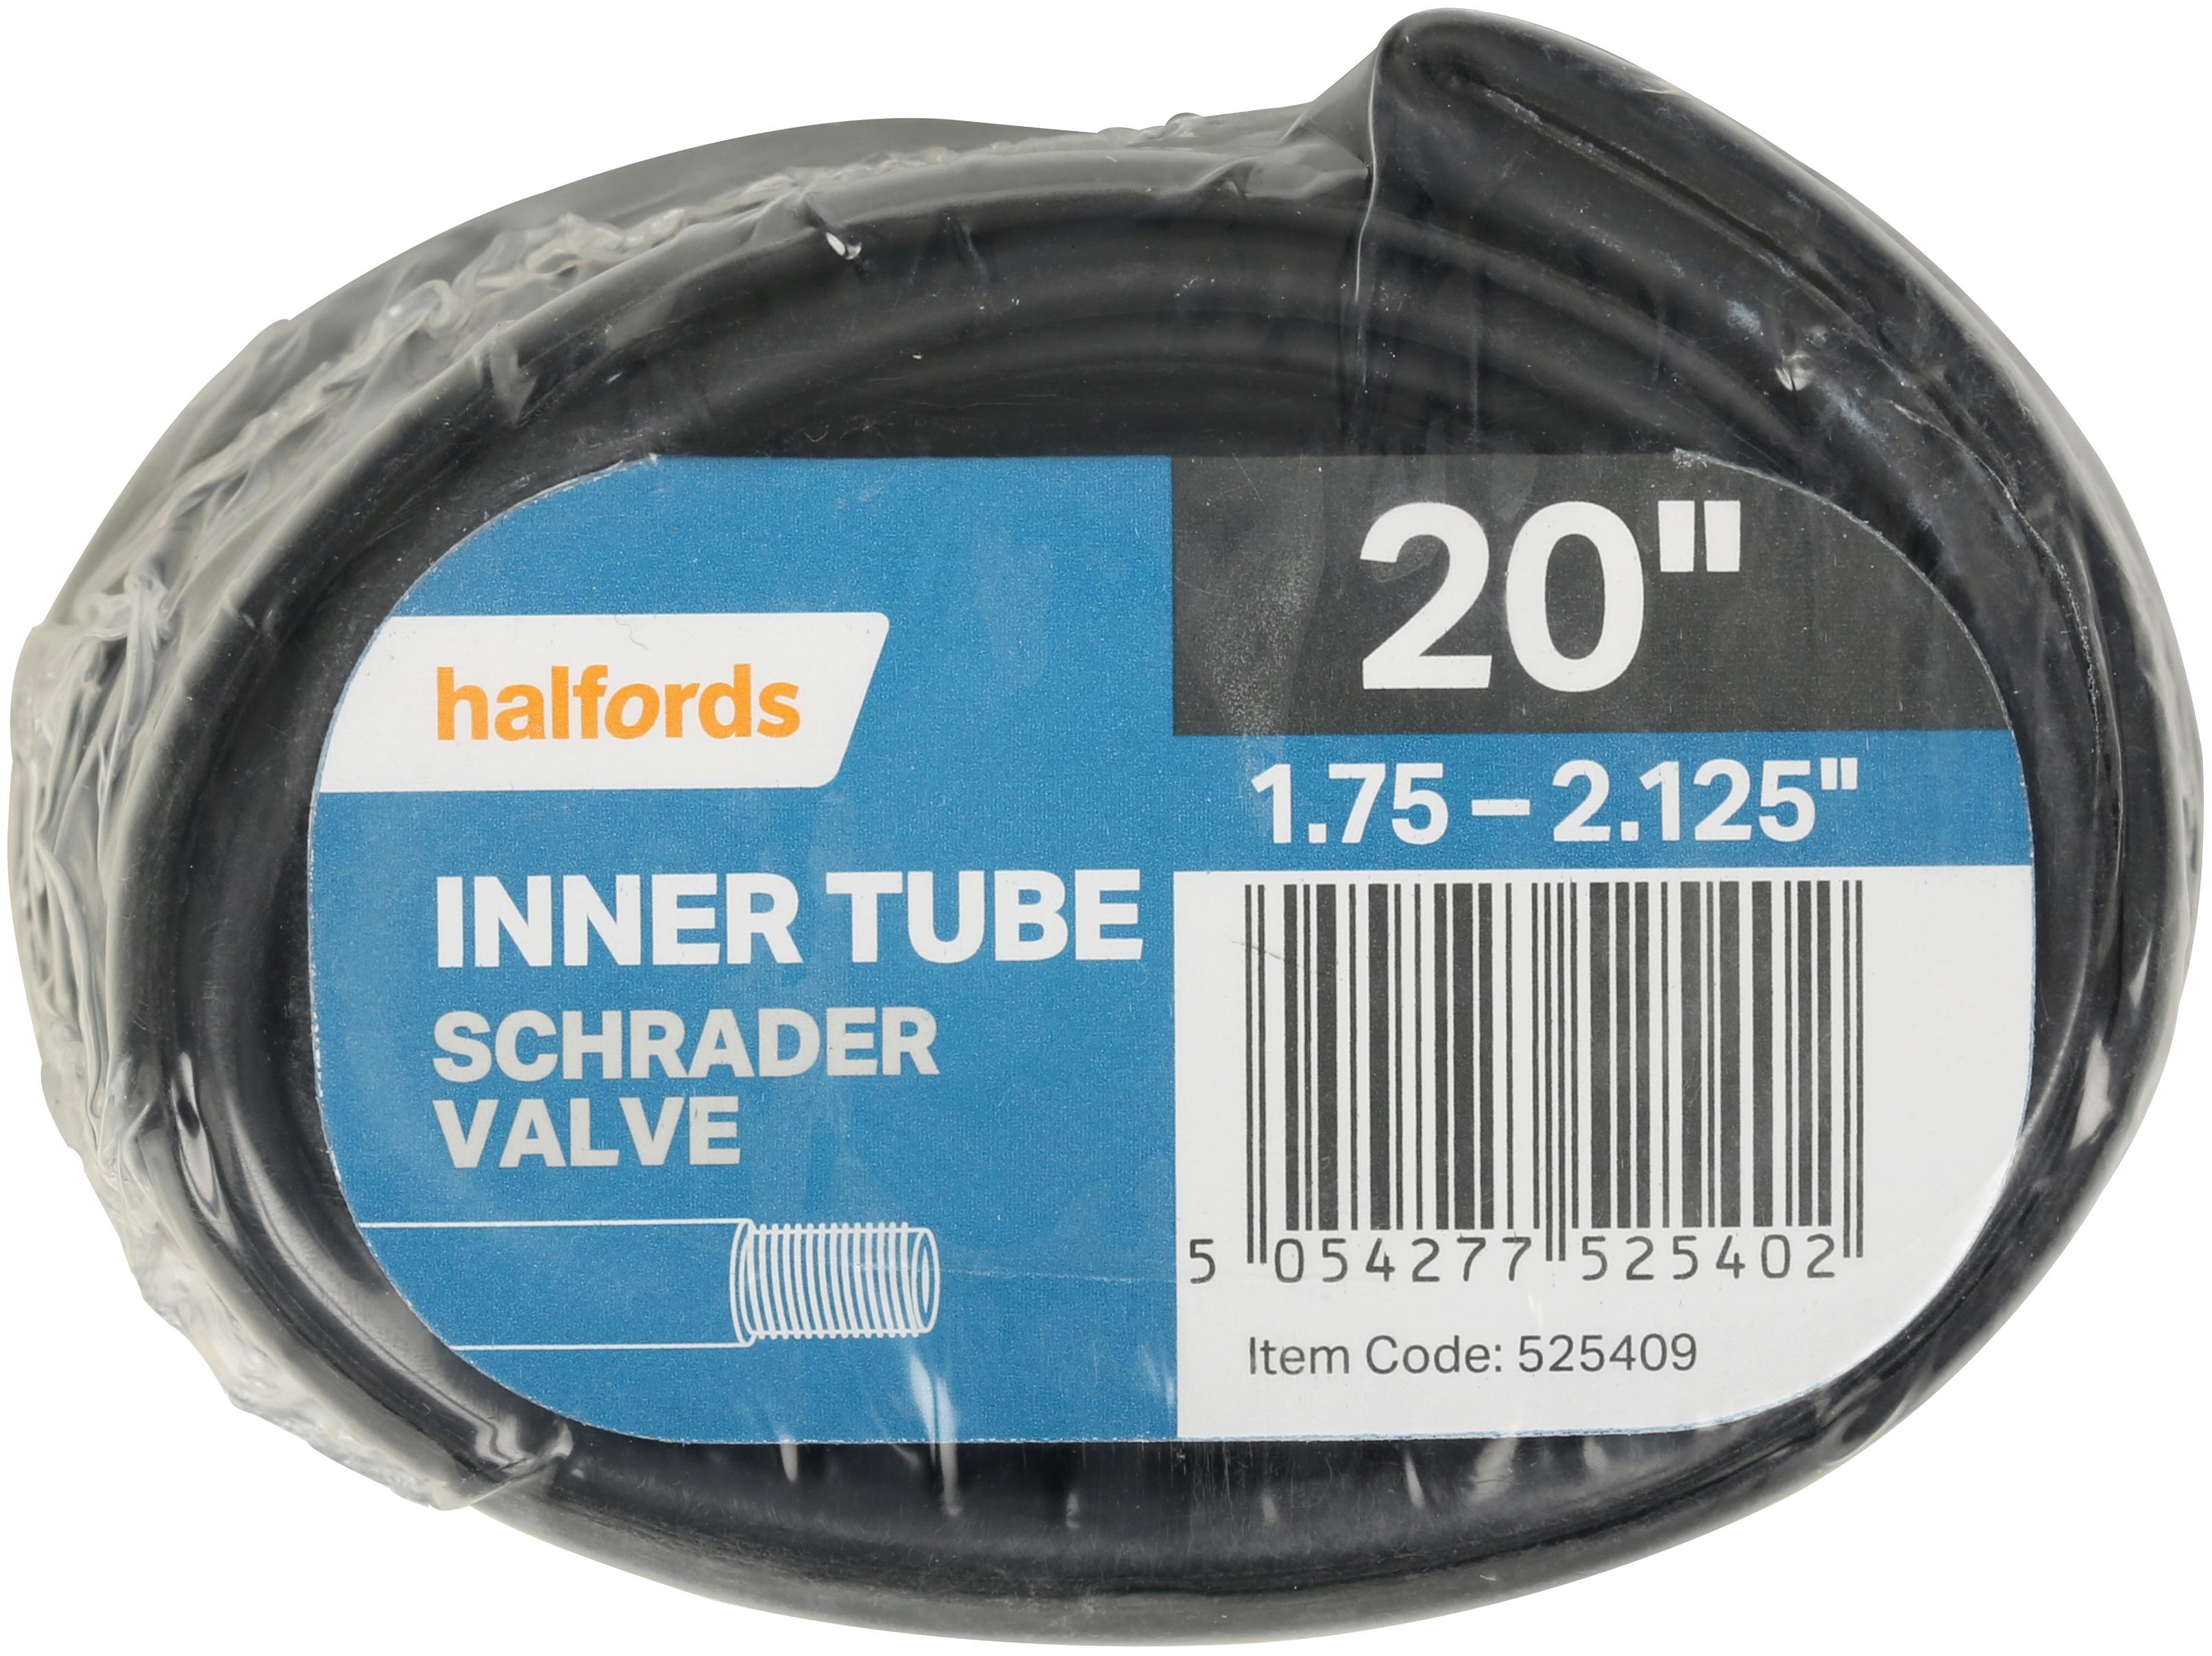 puncture proof inner tubes